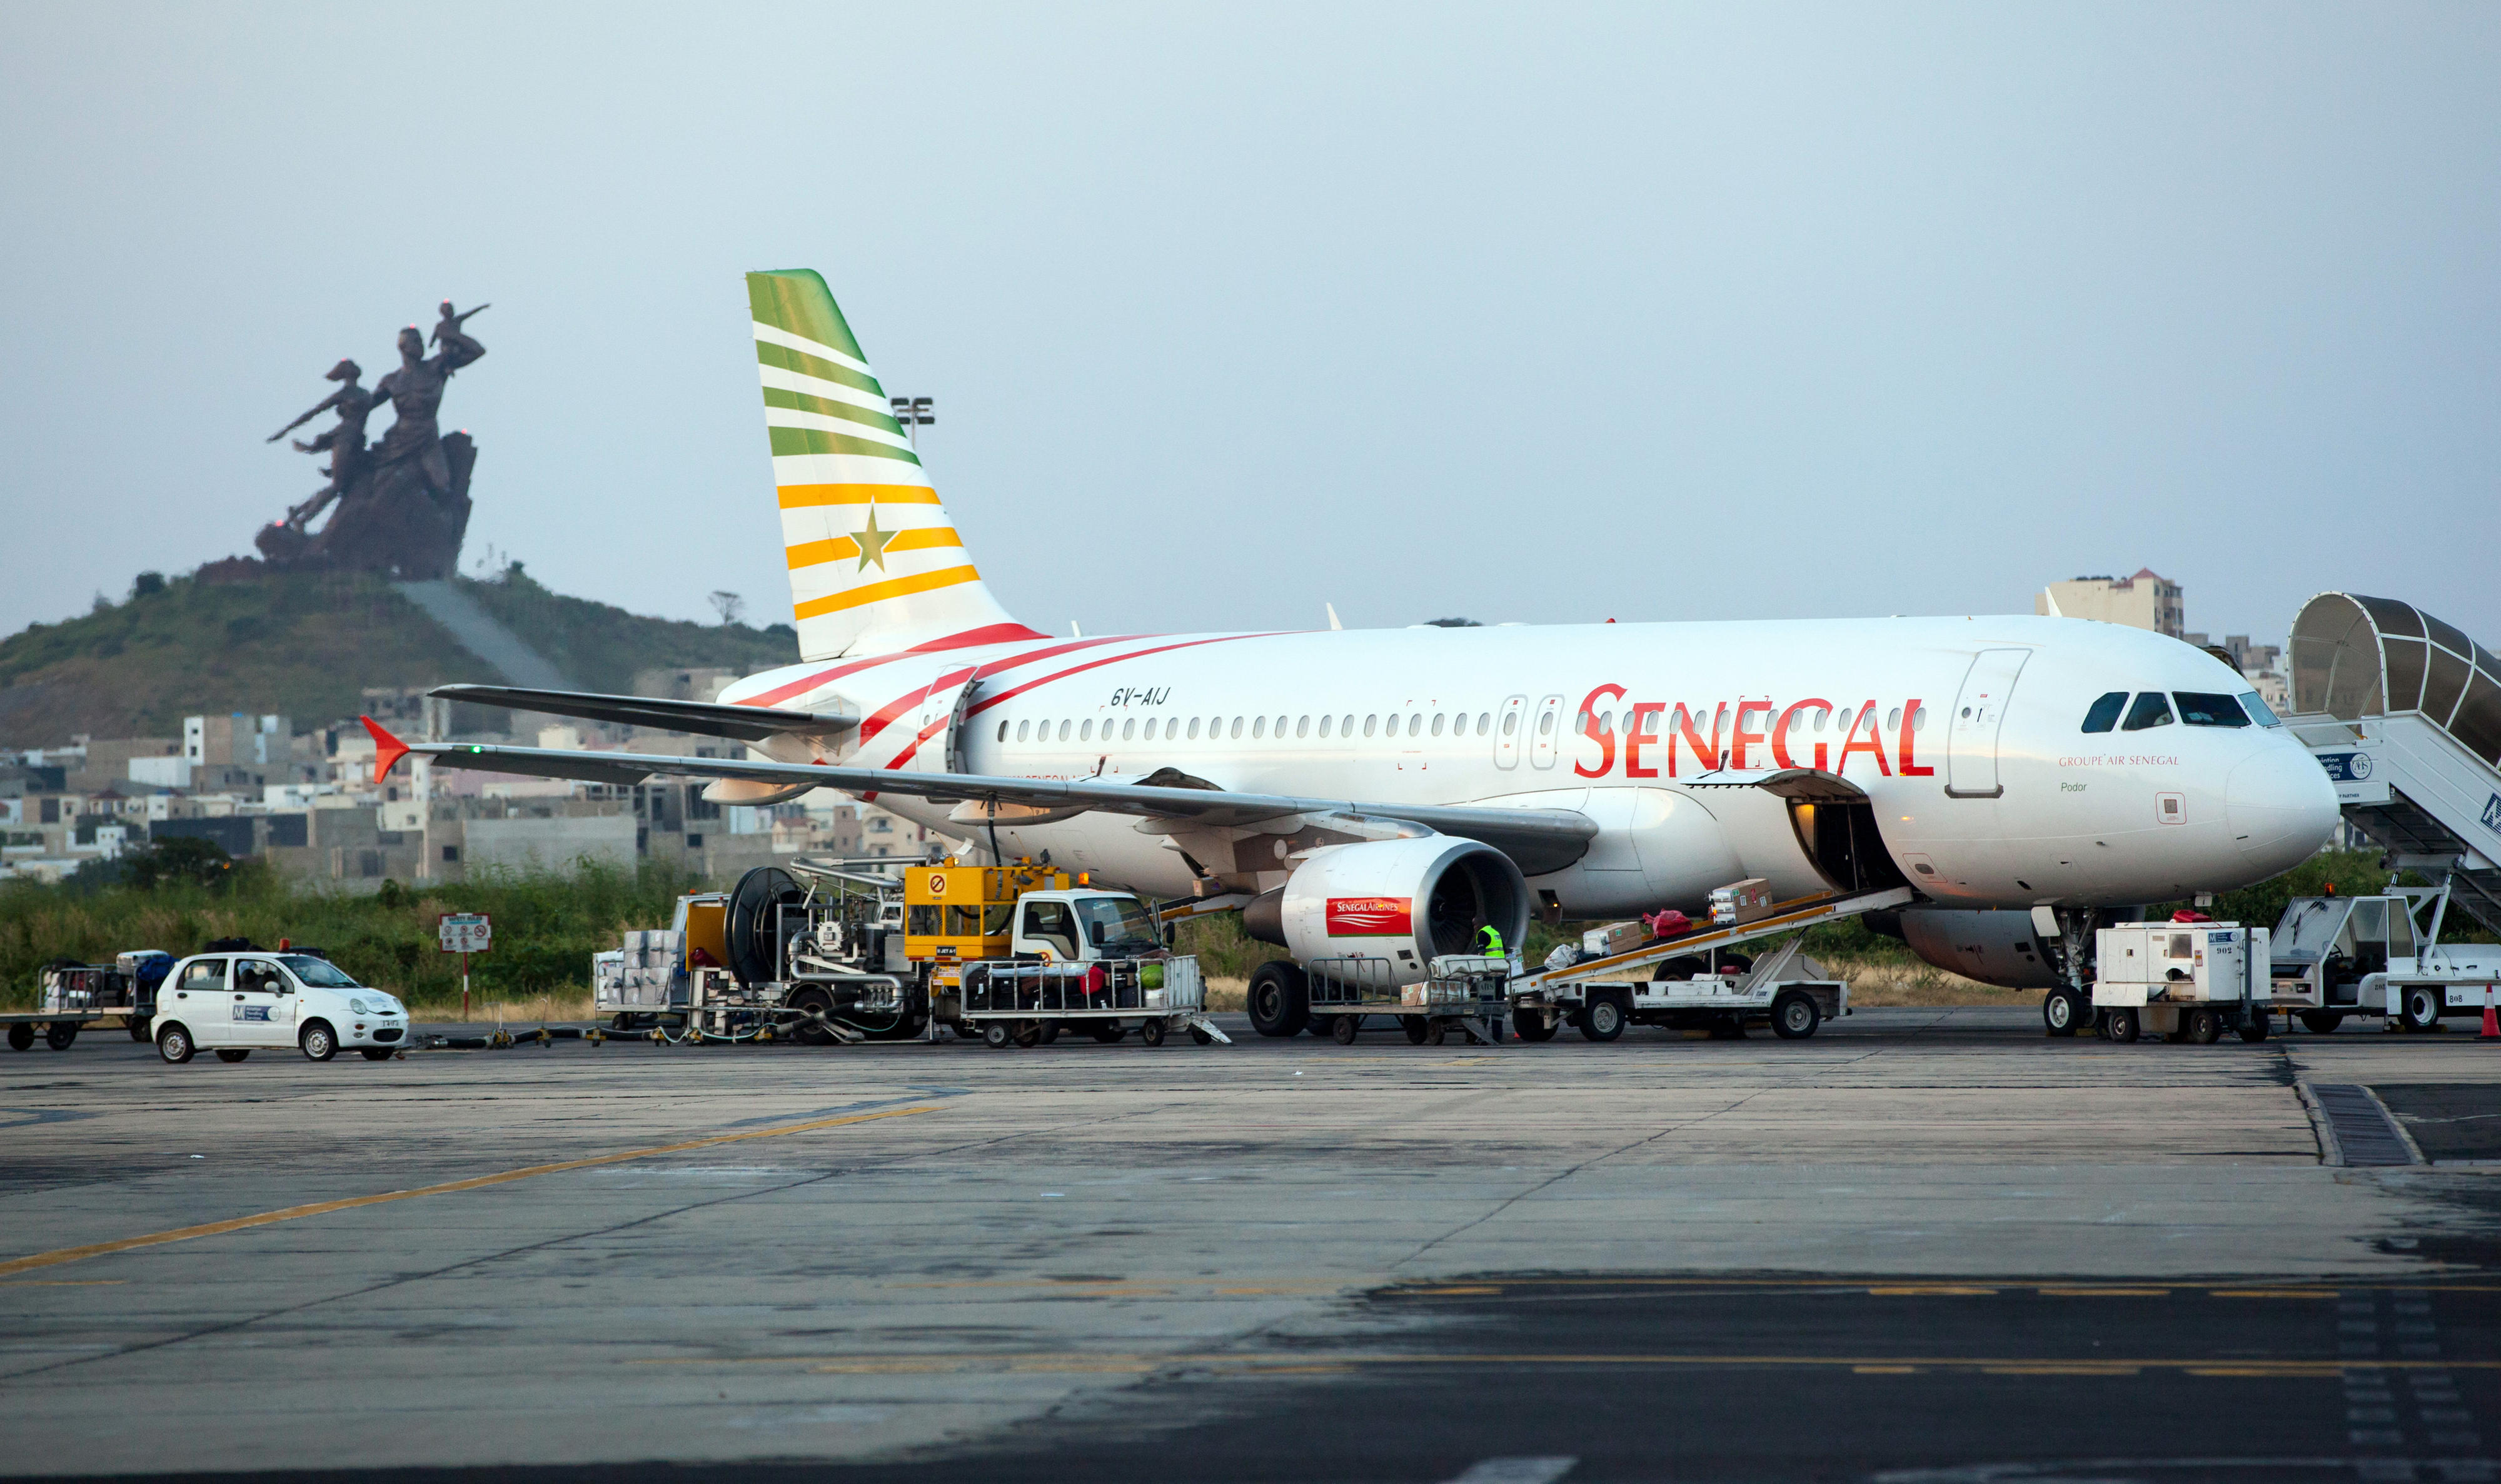 Plane at the Leopold Sedar Senghor airport in Dakar, Senegal, with the African Renaissance monument in the background